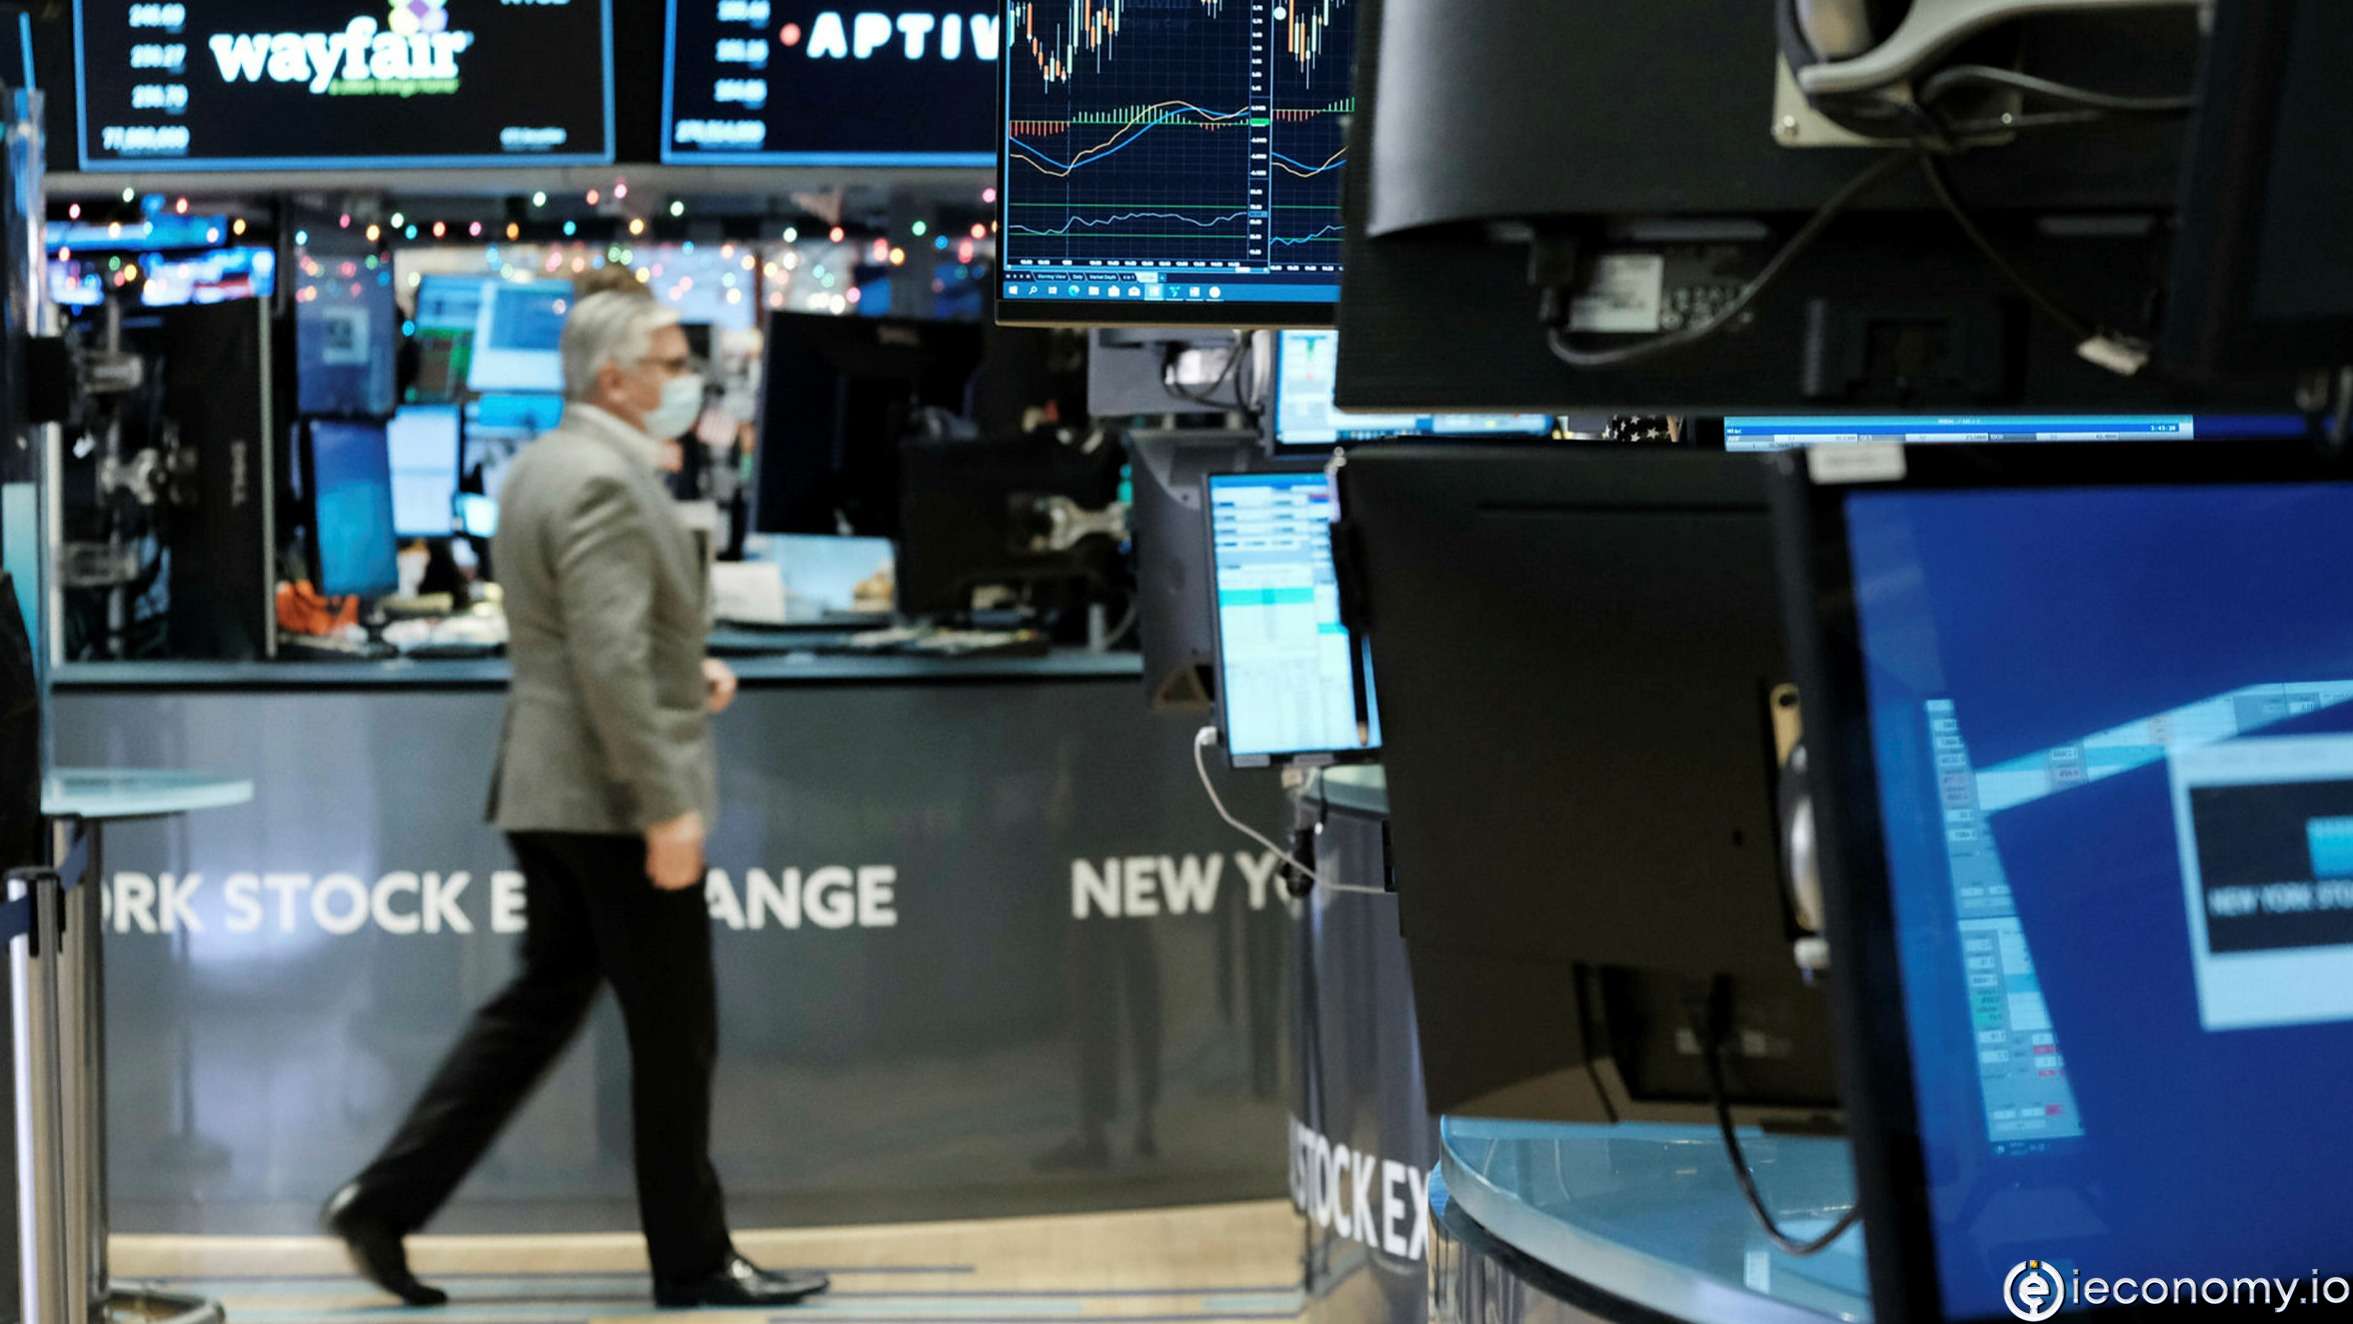 Europe stocks close lower as monetary policy decisions take center stage